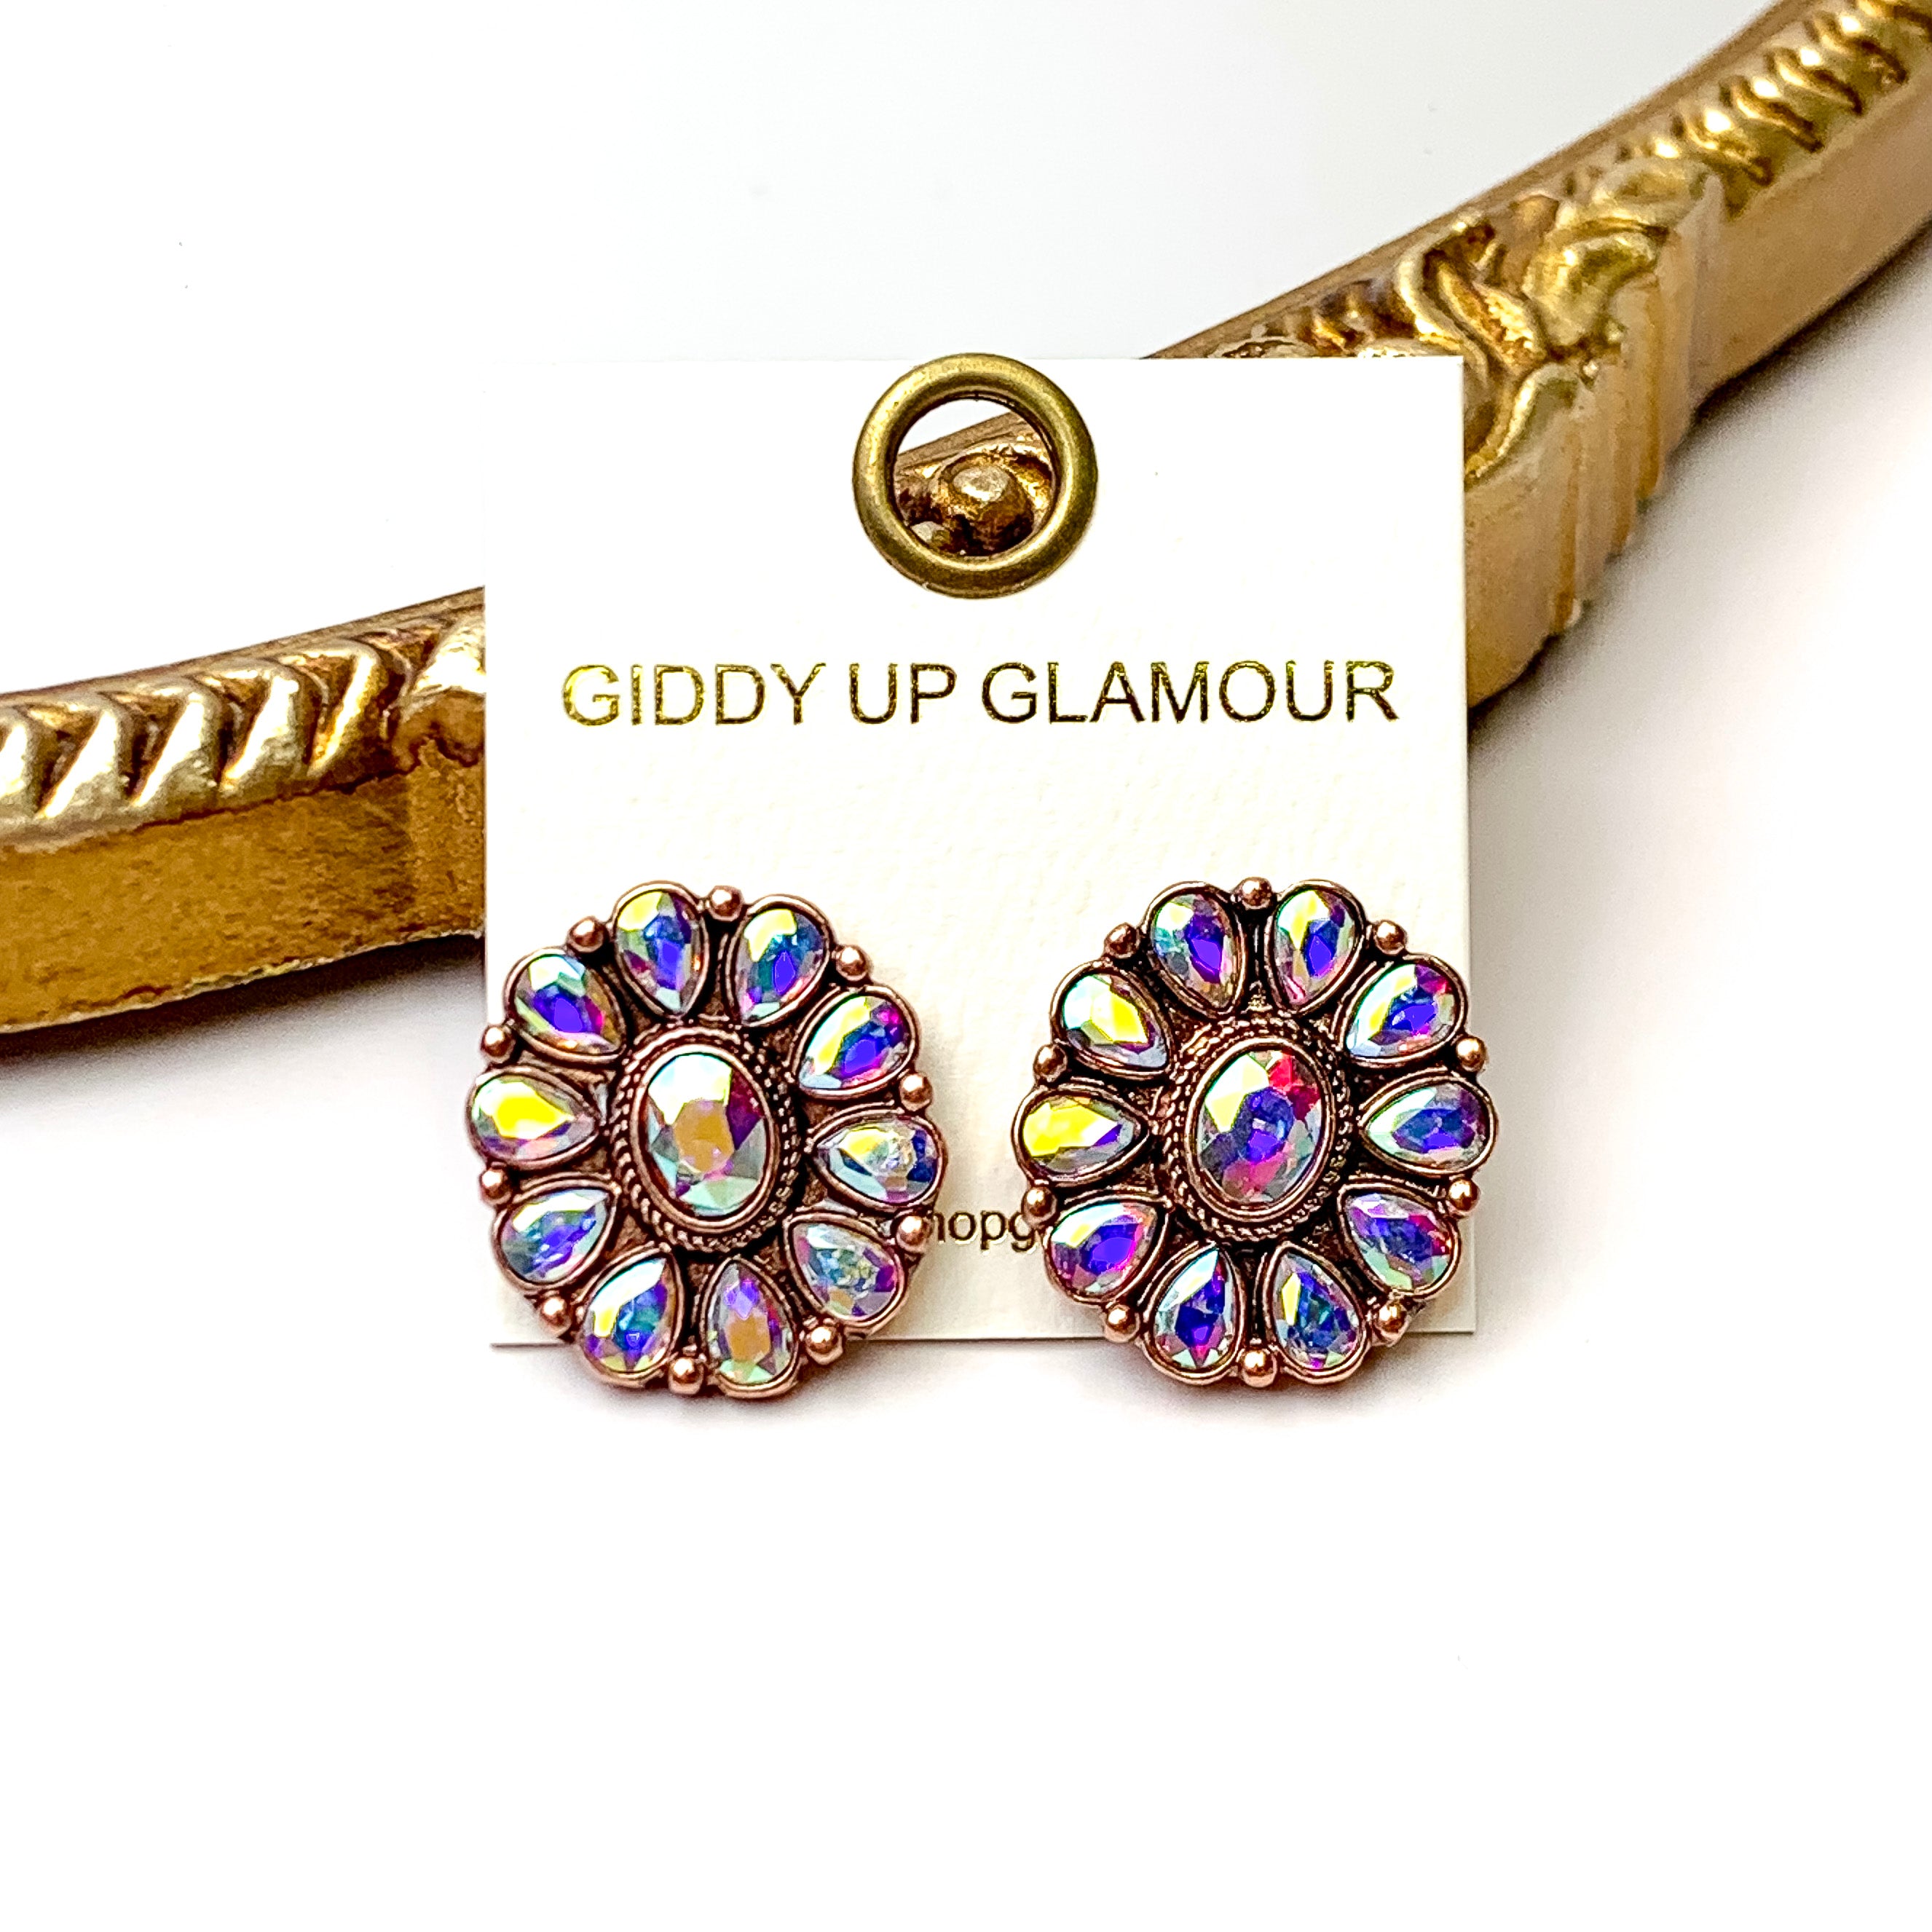 Prismatic Petal AB Stone Flower Concho Stud Earrings in Copper Tone - Giddy Up Glamour Boutique